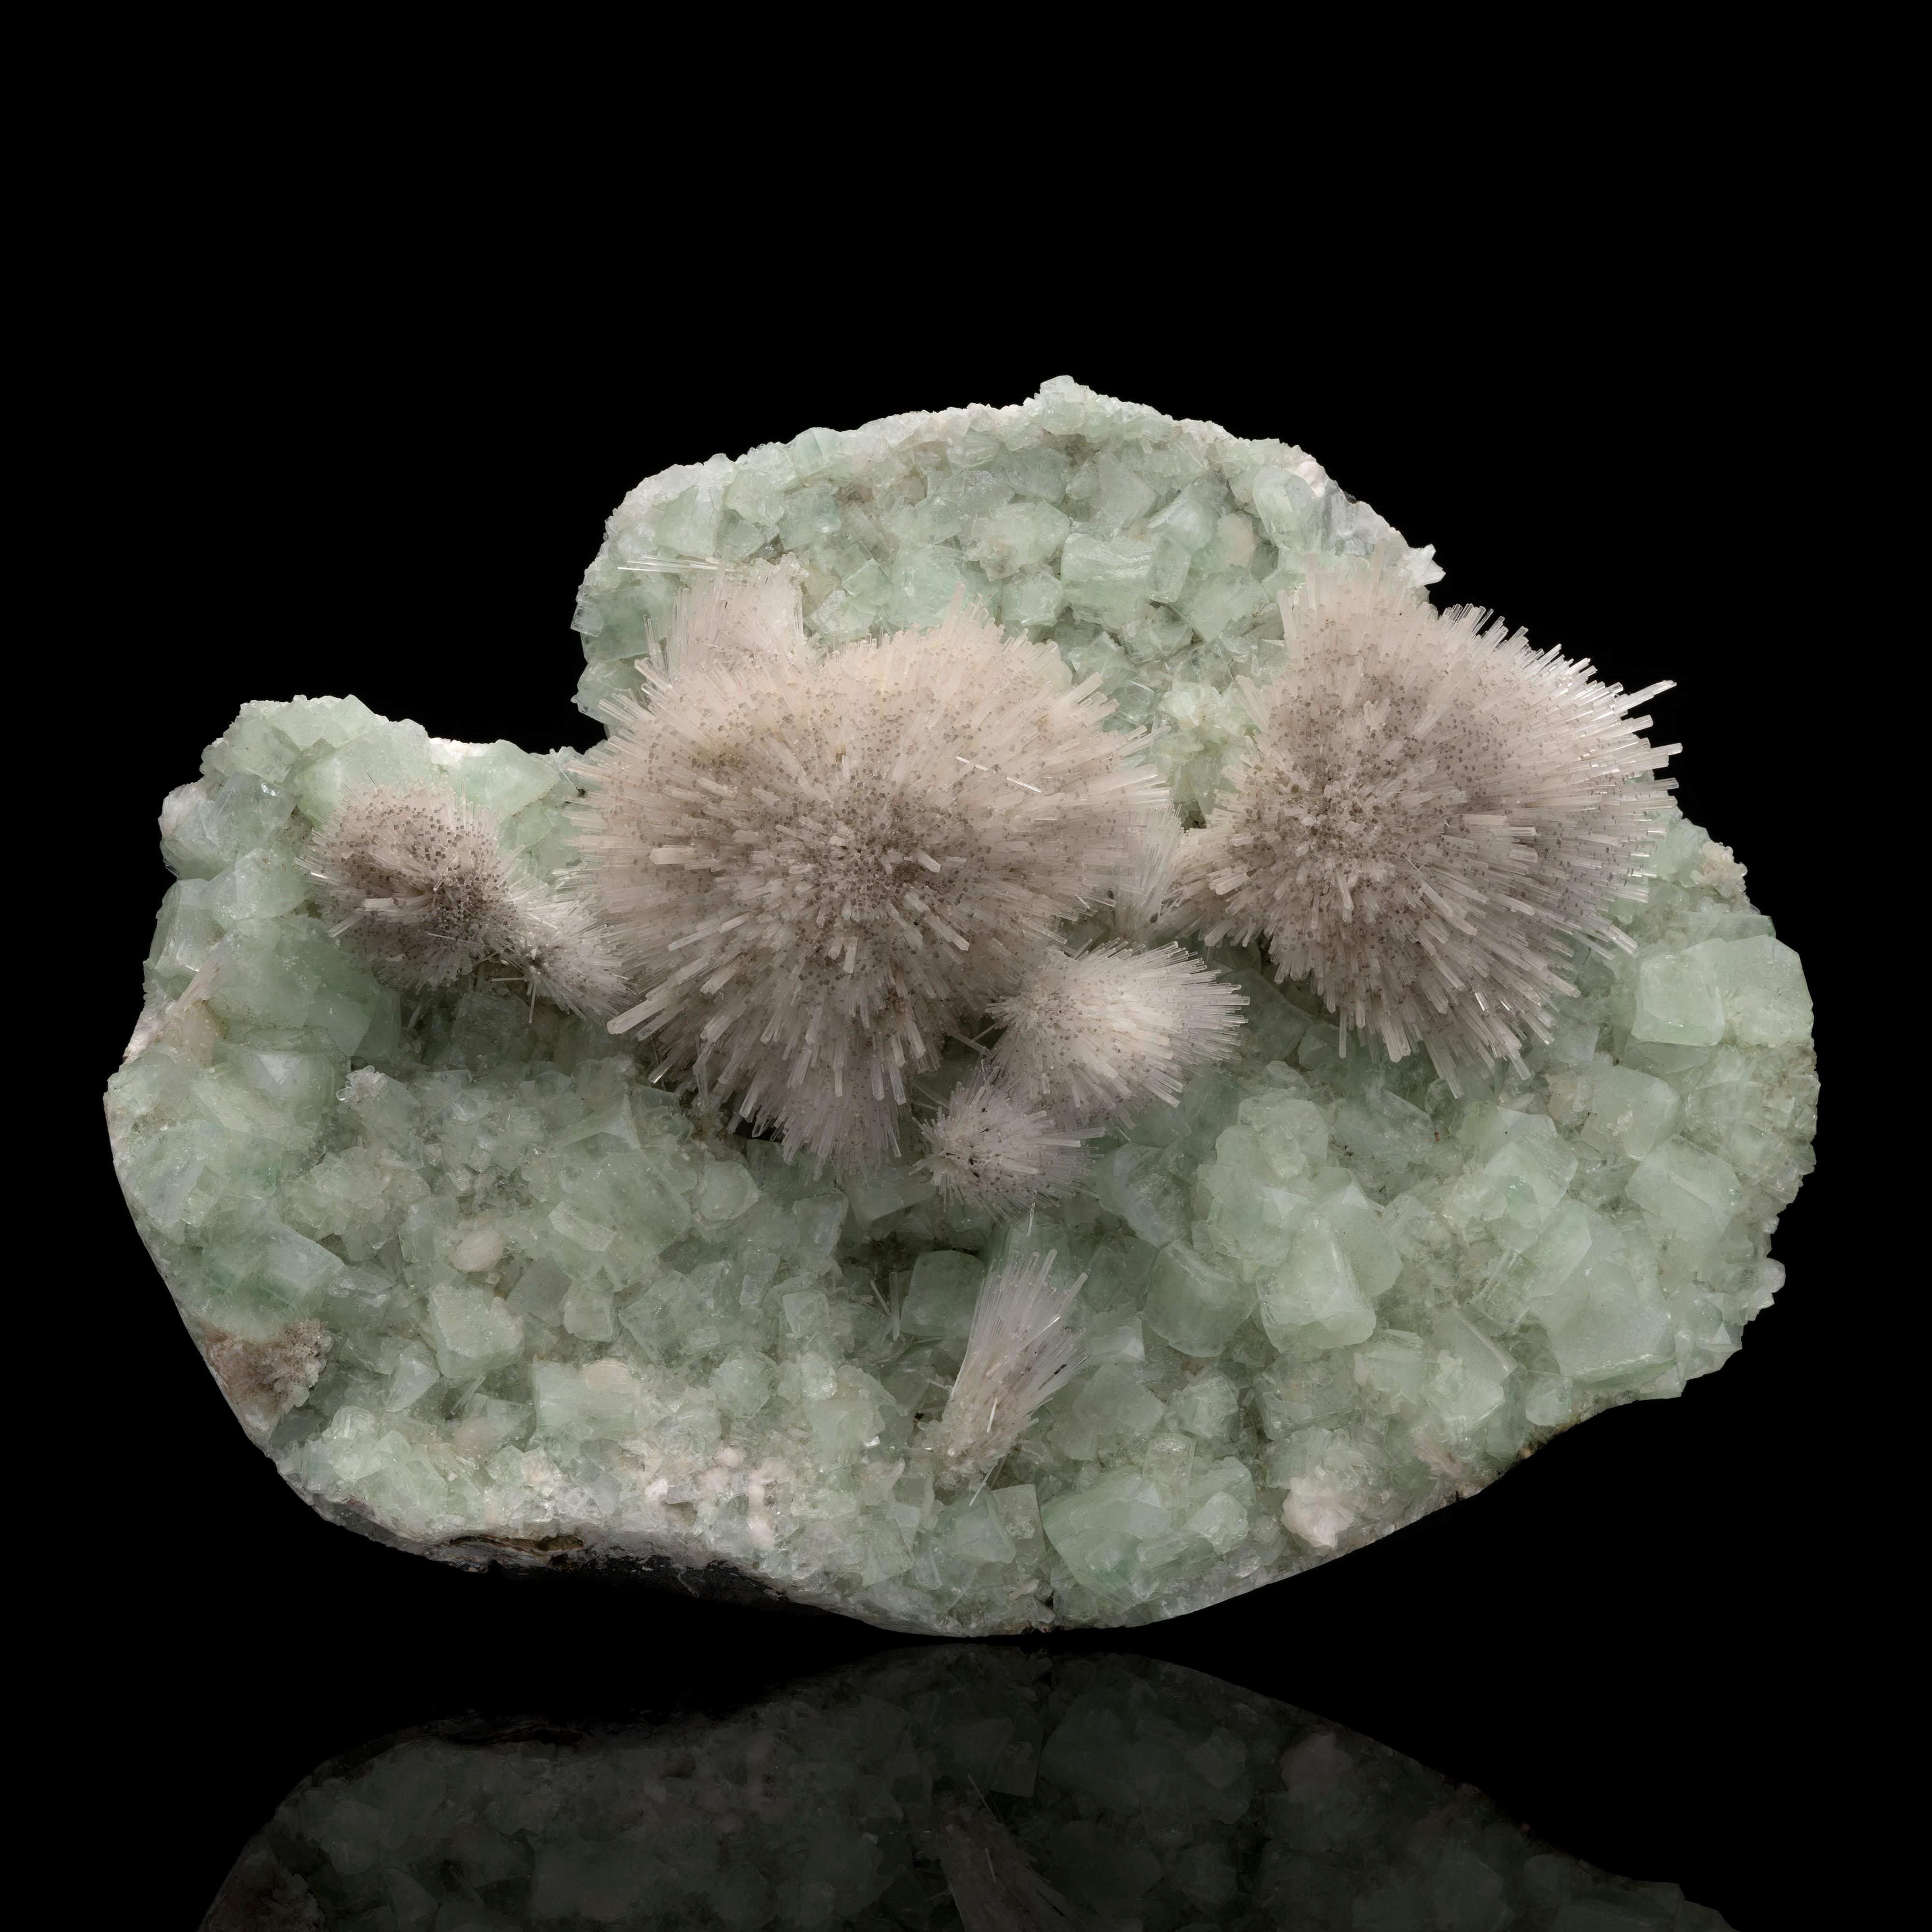 Puna, India

A stunning number of radial mesolites on a bed of green apophyllite. A complete 180 degree flawless explosion of a zeolite mineral occuring as sprays of thin, prismatic needles and square crystals. This is museum quality at its finest.